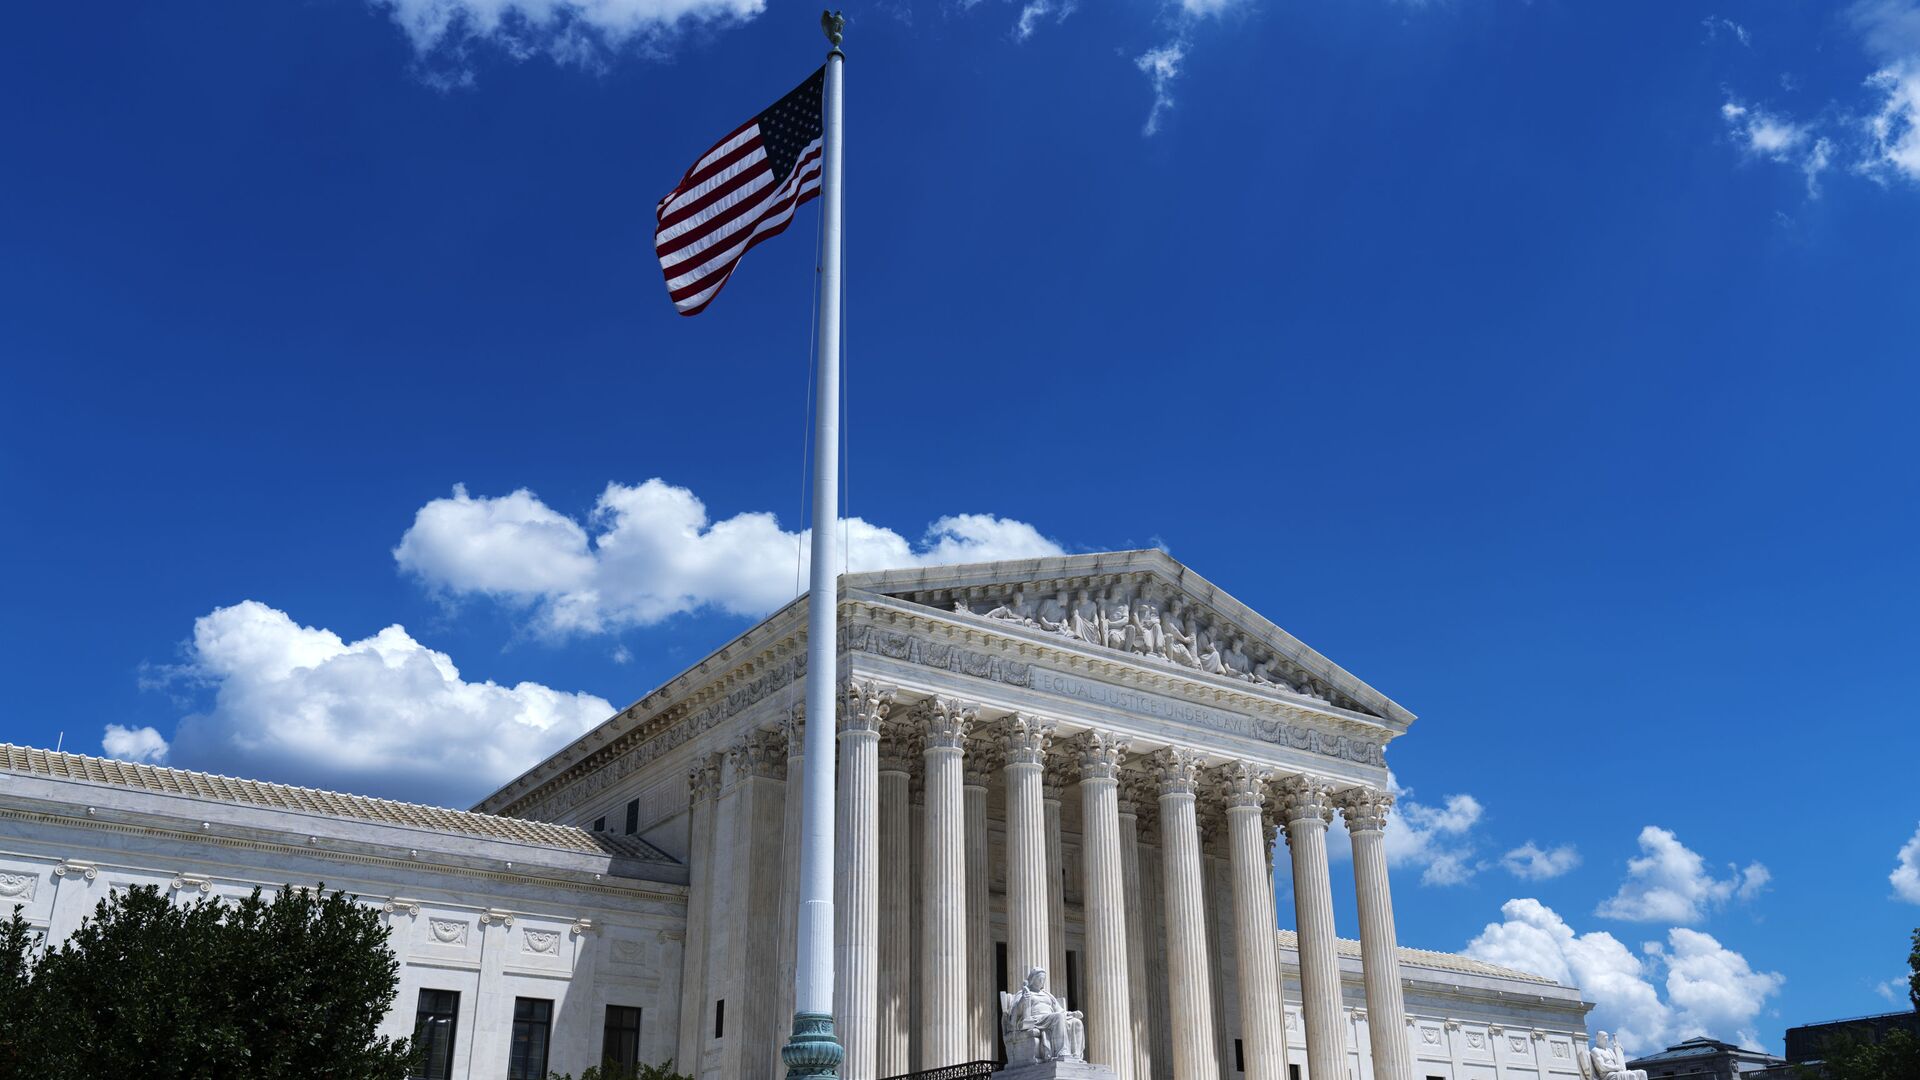 The US Supreme Court is seen on Capitol Hill in Washington, Wednesday, June 30, 2021 - Sputnik International, 1920, 23.07.2021